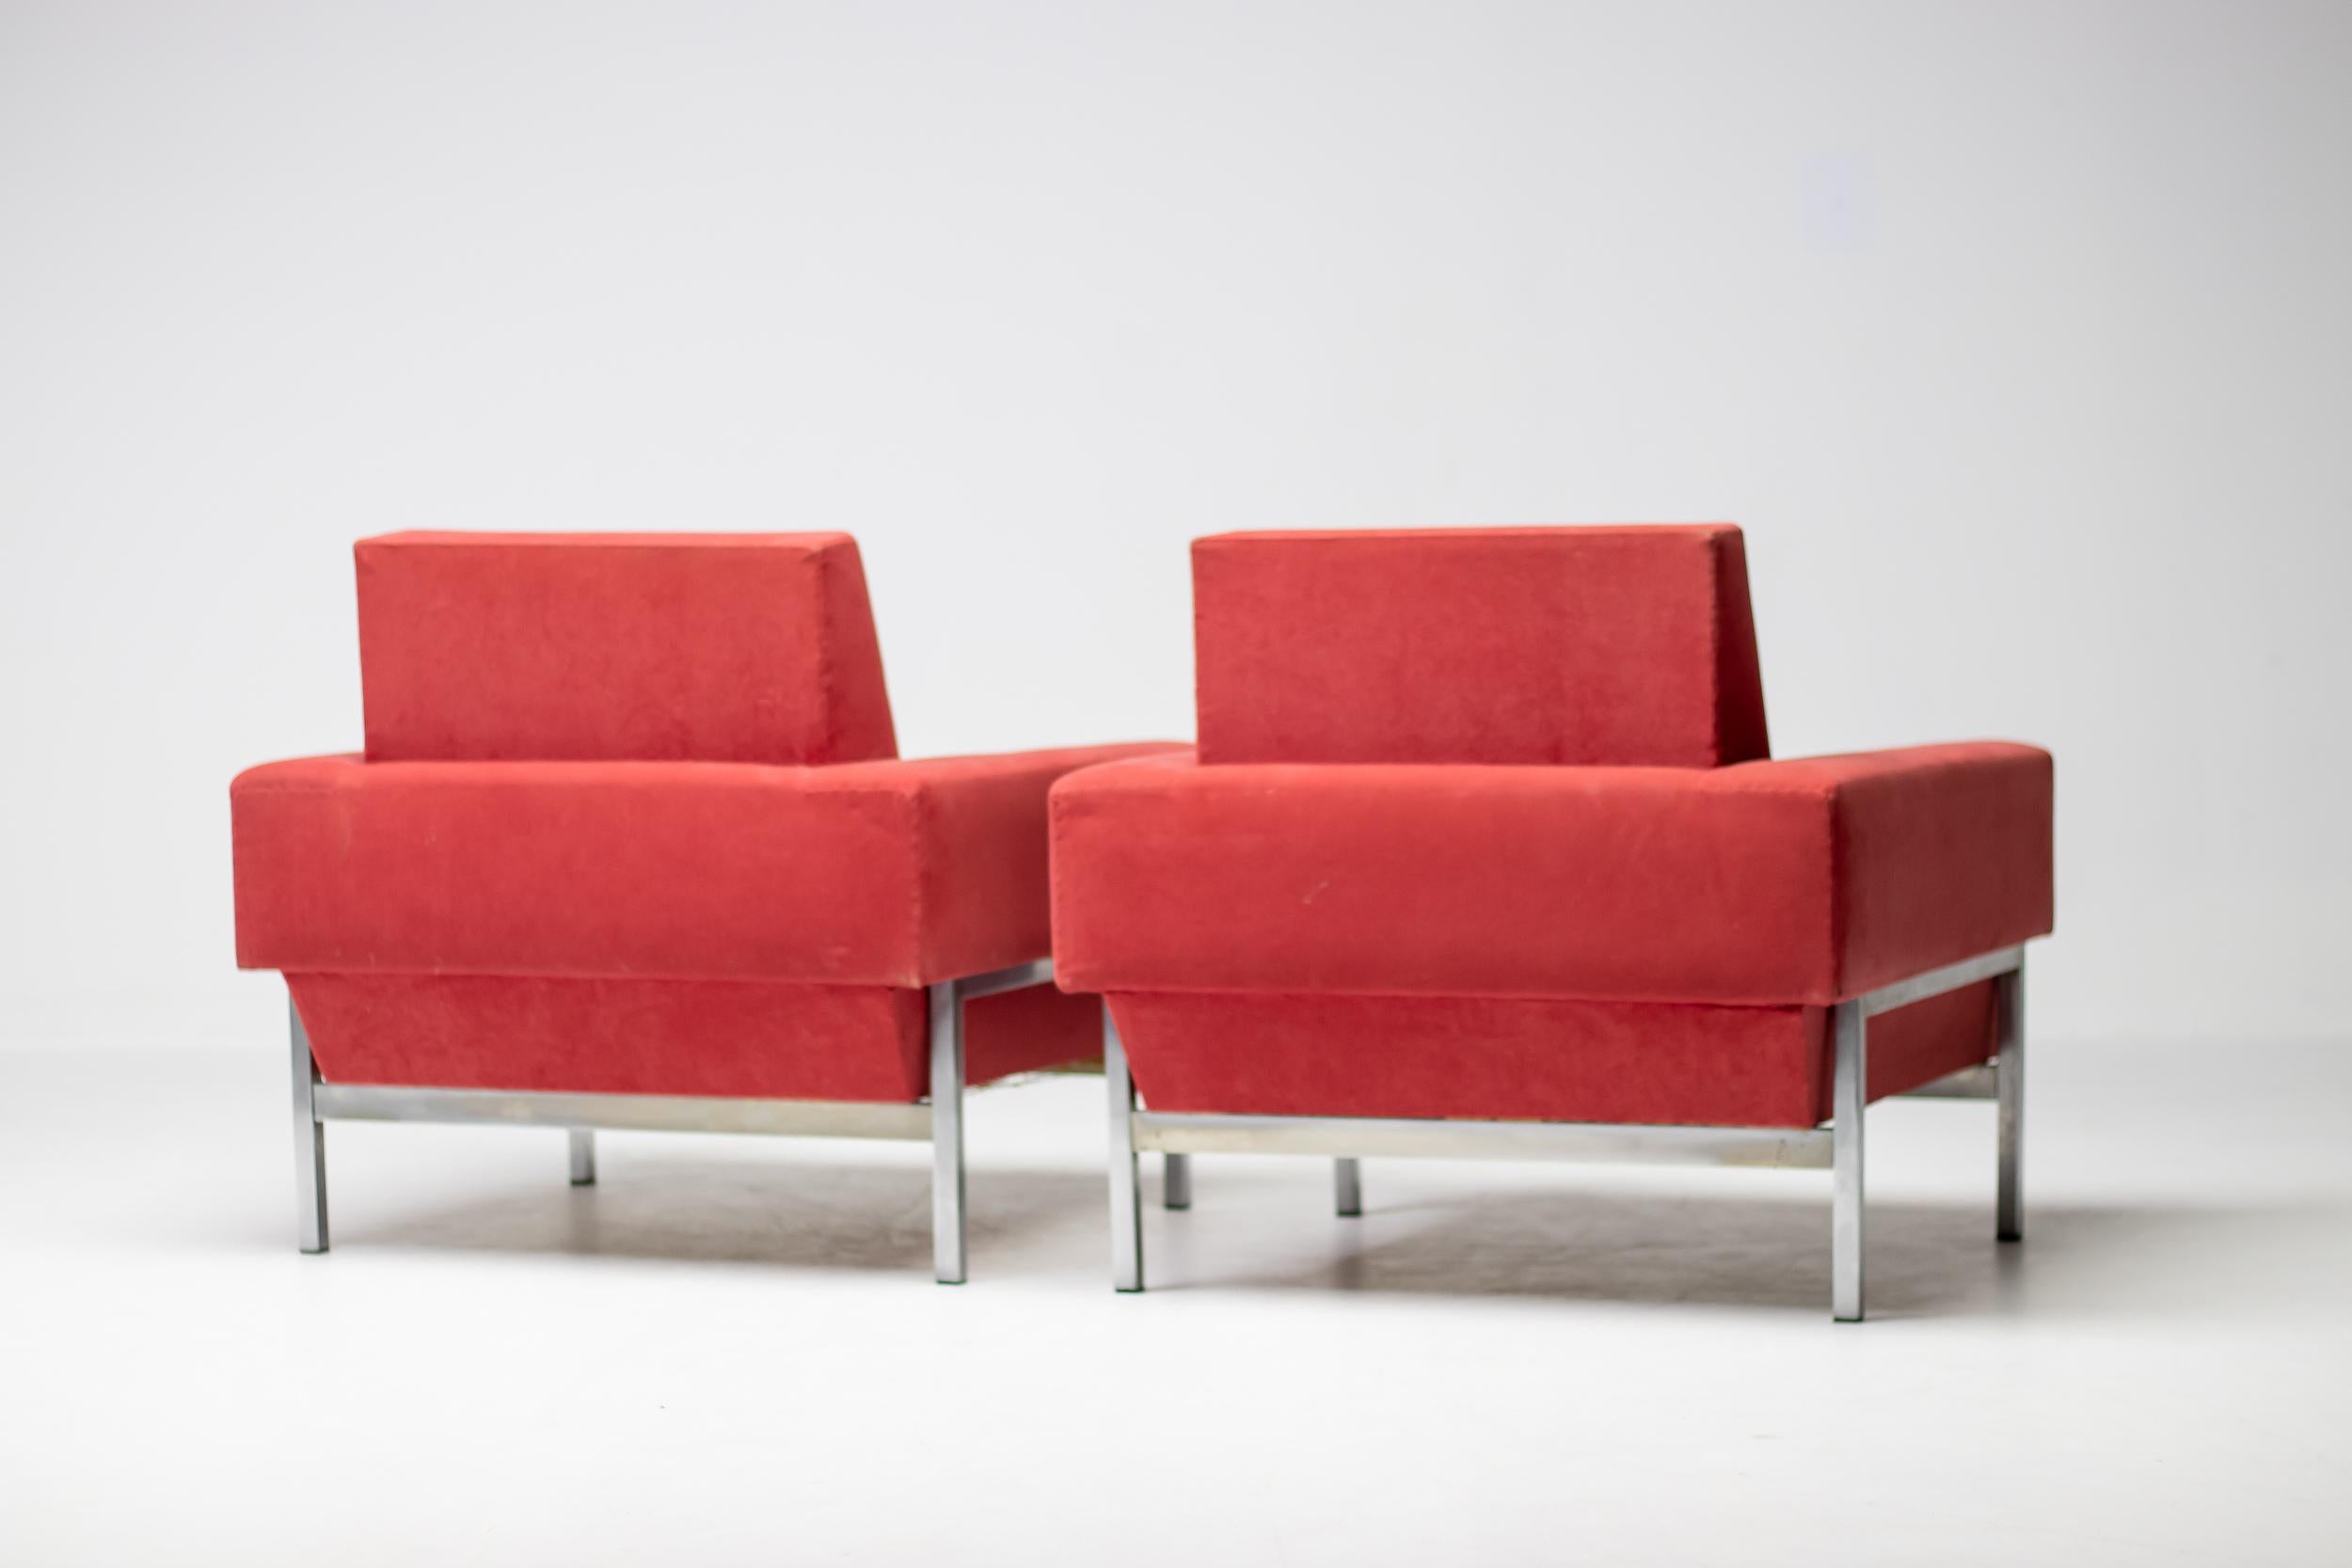 Kiushu club chairs in red Alcantara fabric, made in Italy circa 1960 by Saporiti. 
These chairs, equipped with a chromed steel frame, feature a very distinctive sloped back at the bottom. 
The chromed frame forms a wonderful contrast to the red